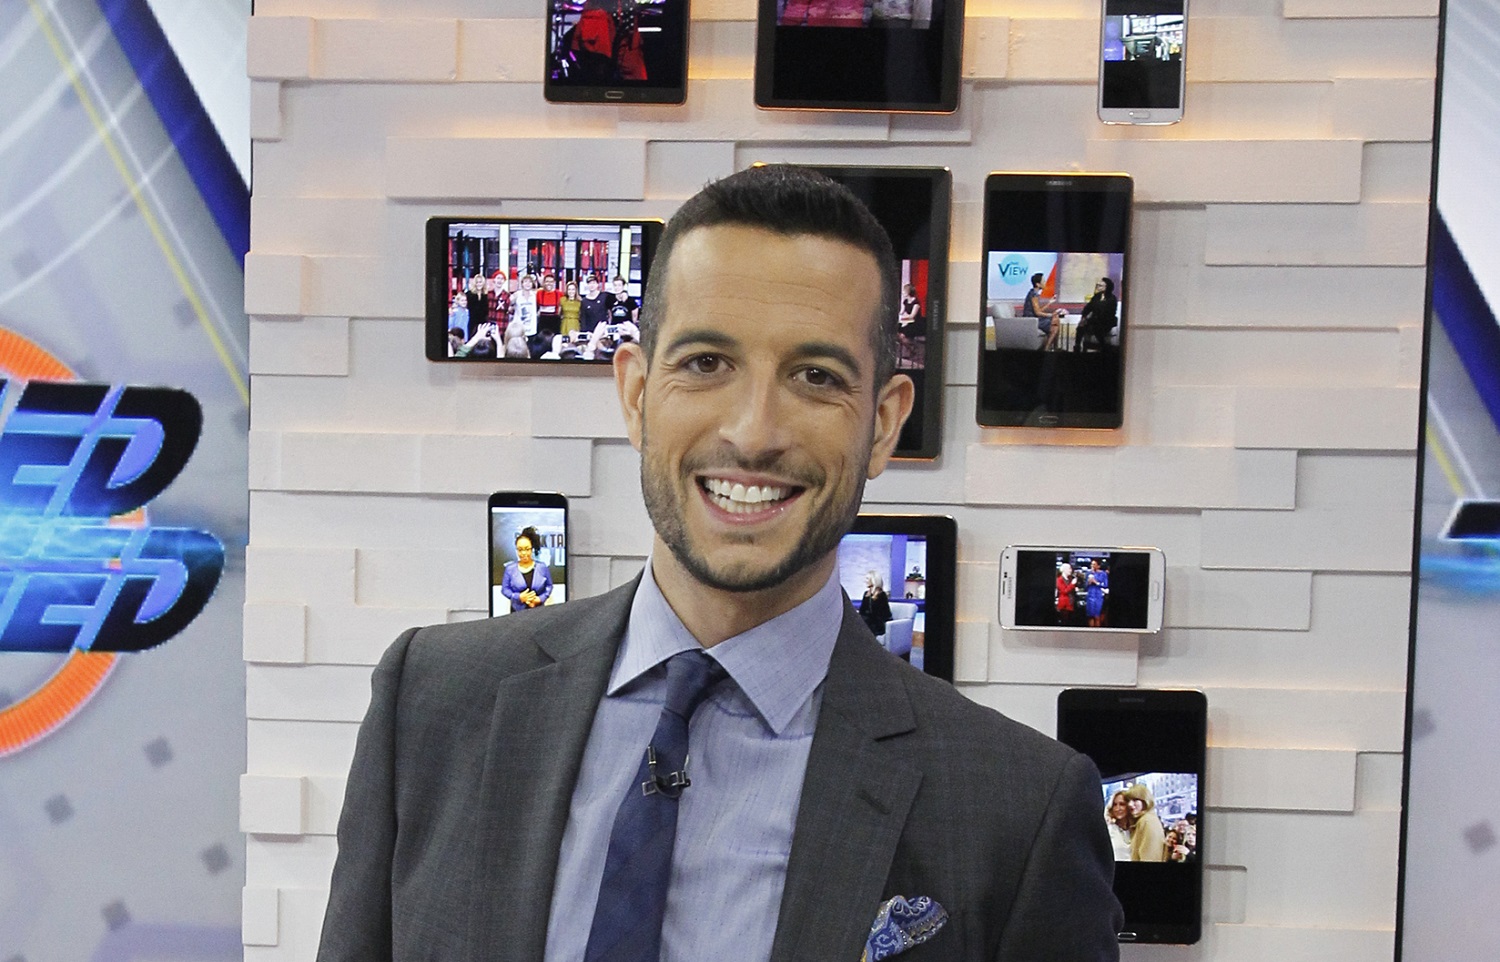 Tony Reali hosts 'Around the Horn,' a panel show airing weekday afternoons on ESPN.